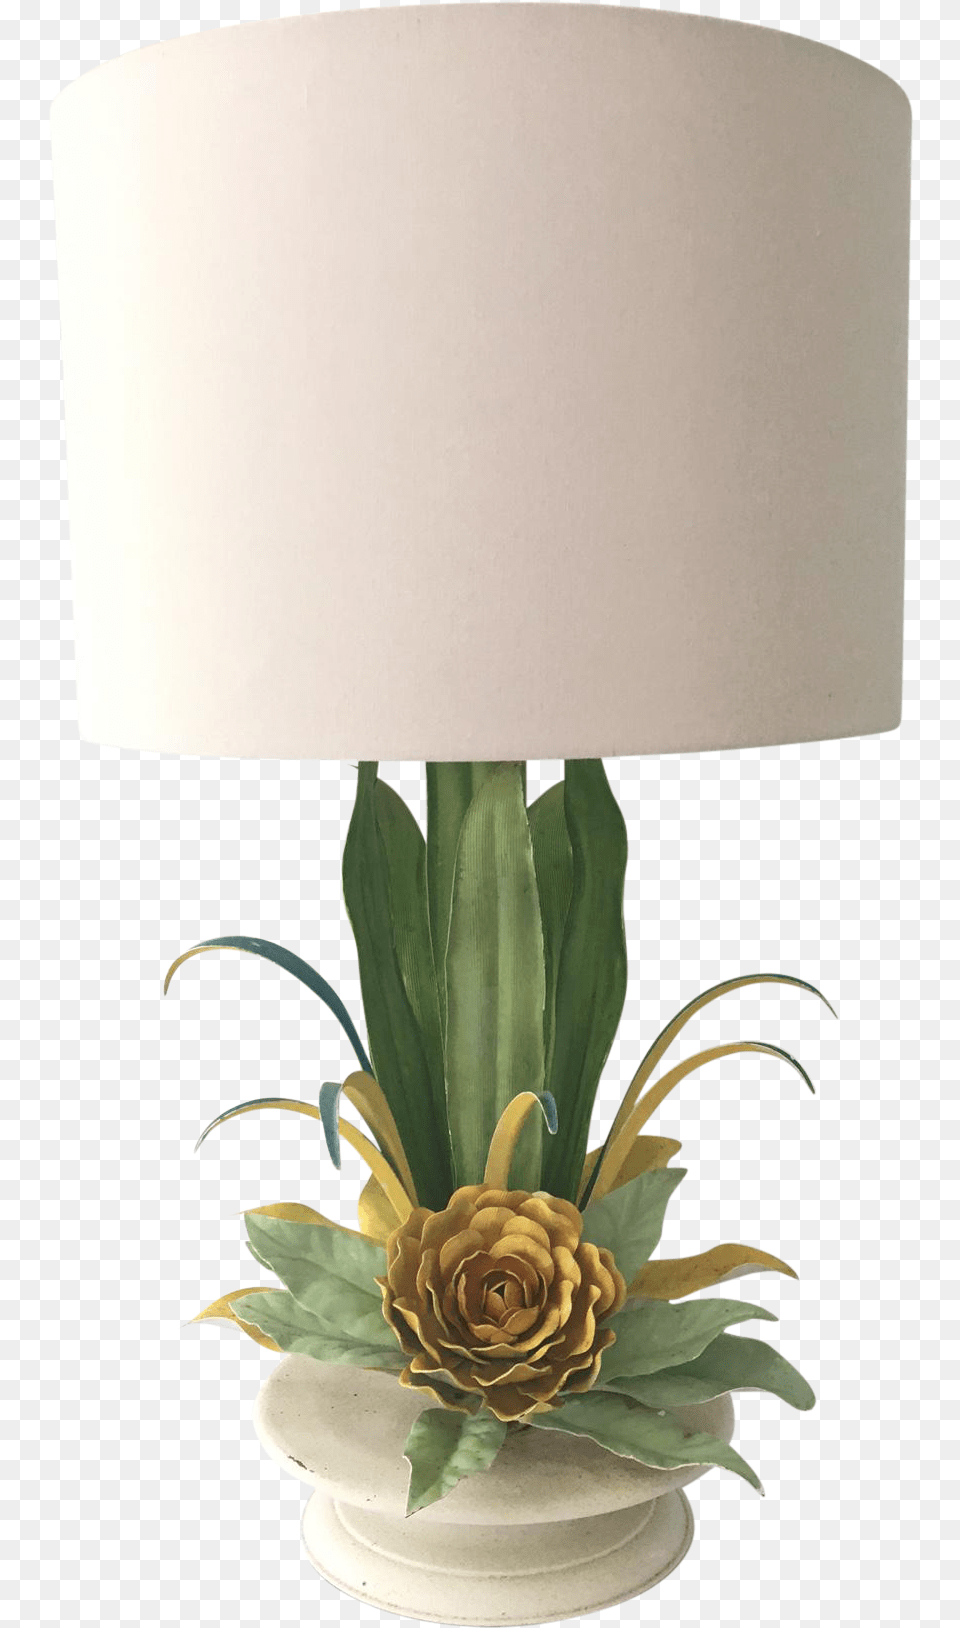 Lilly Lilypad Drawing Lily Pad Flower Lamp, Lampshade, Table Lamp, Plant, Rose Free Transparent Png